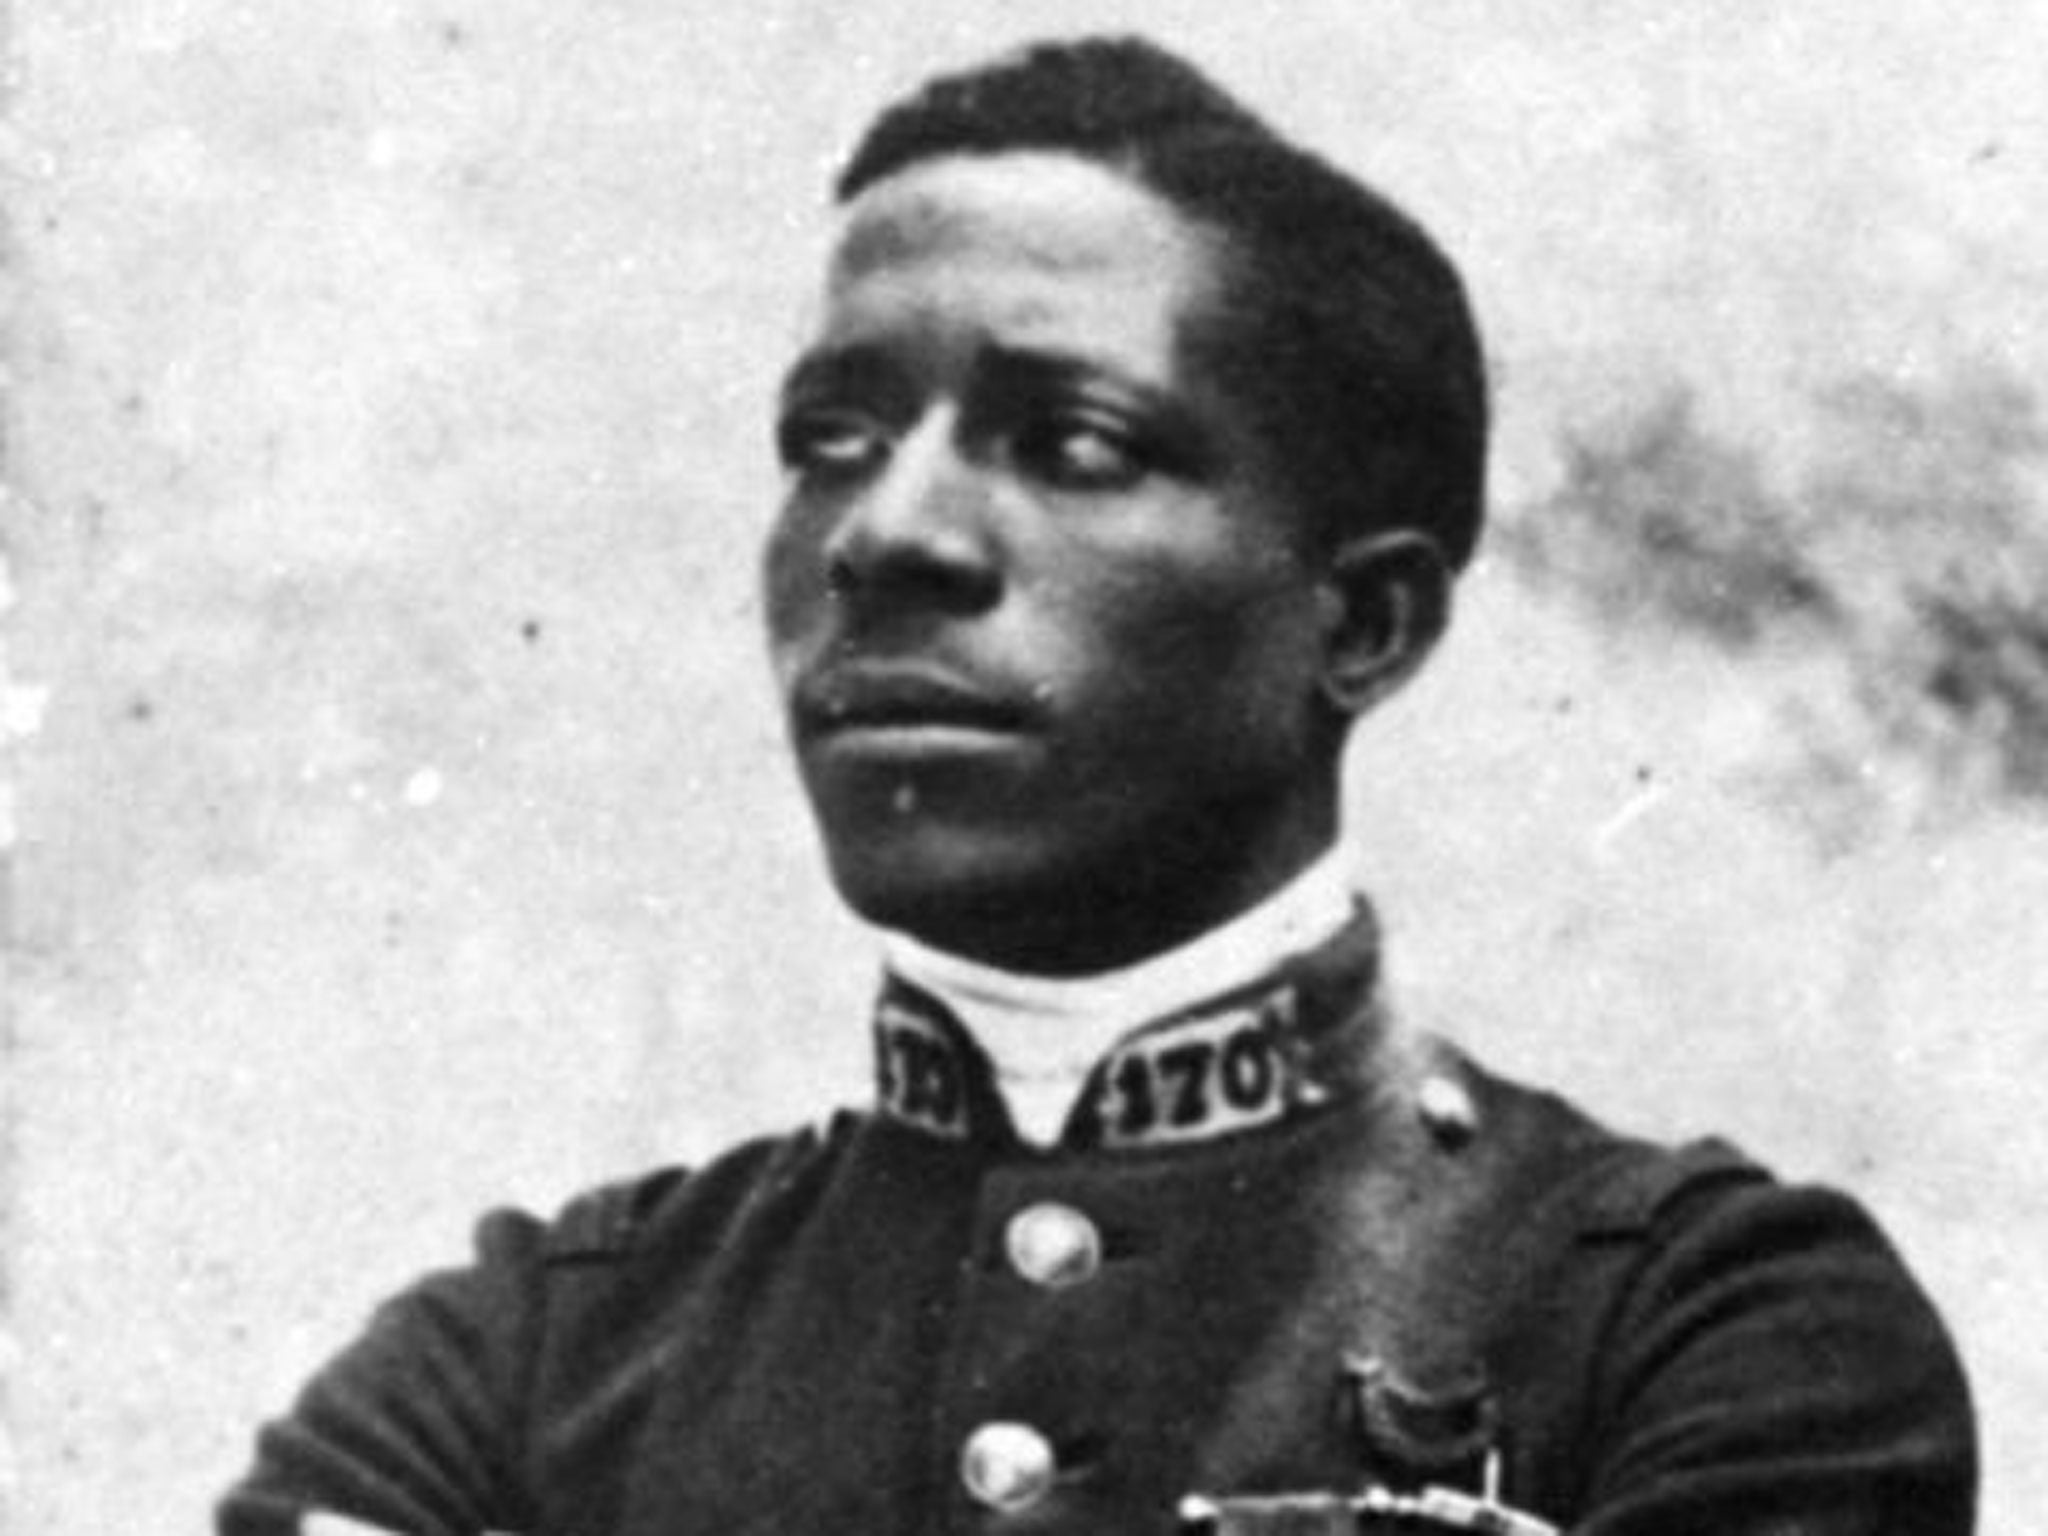 Eugene Jacques Bullard joined the French Flying Corps in 1917